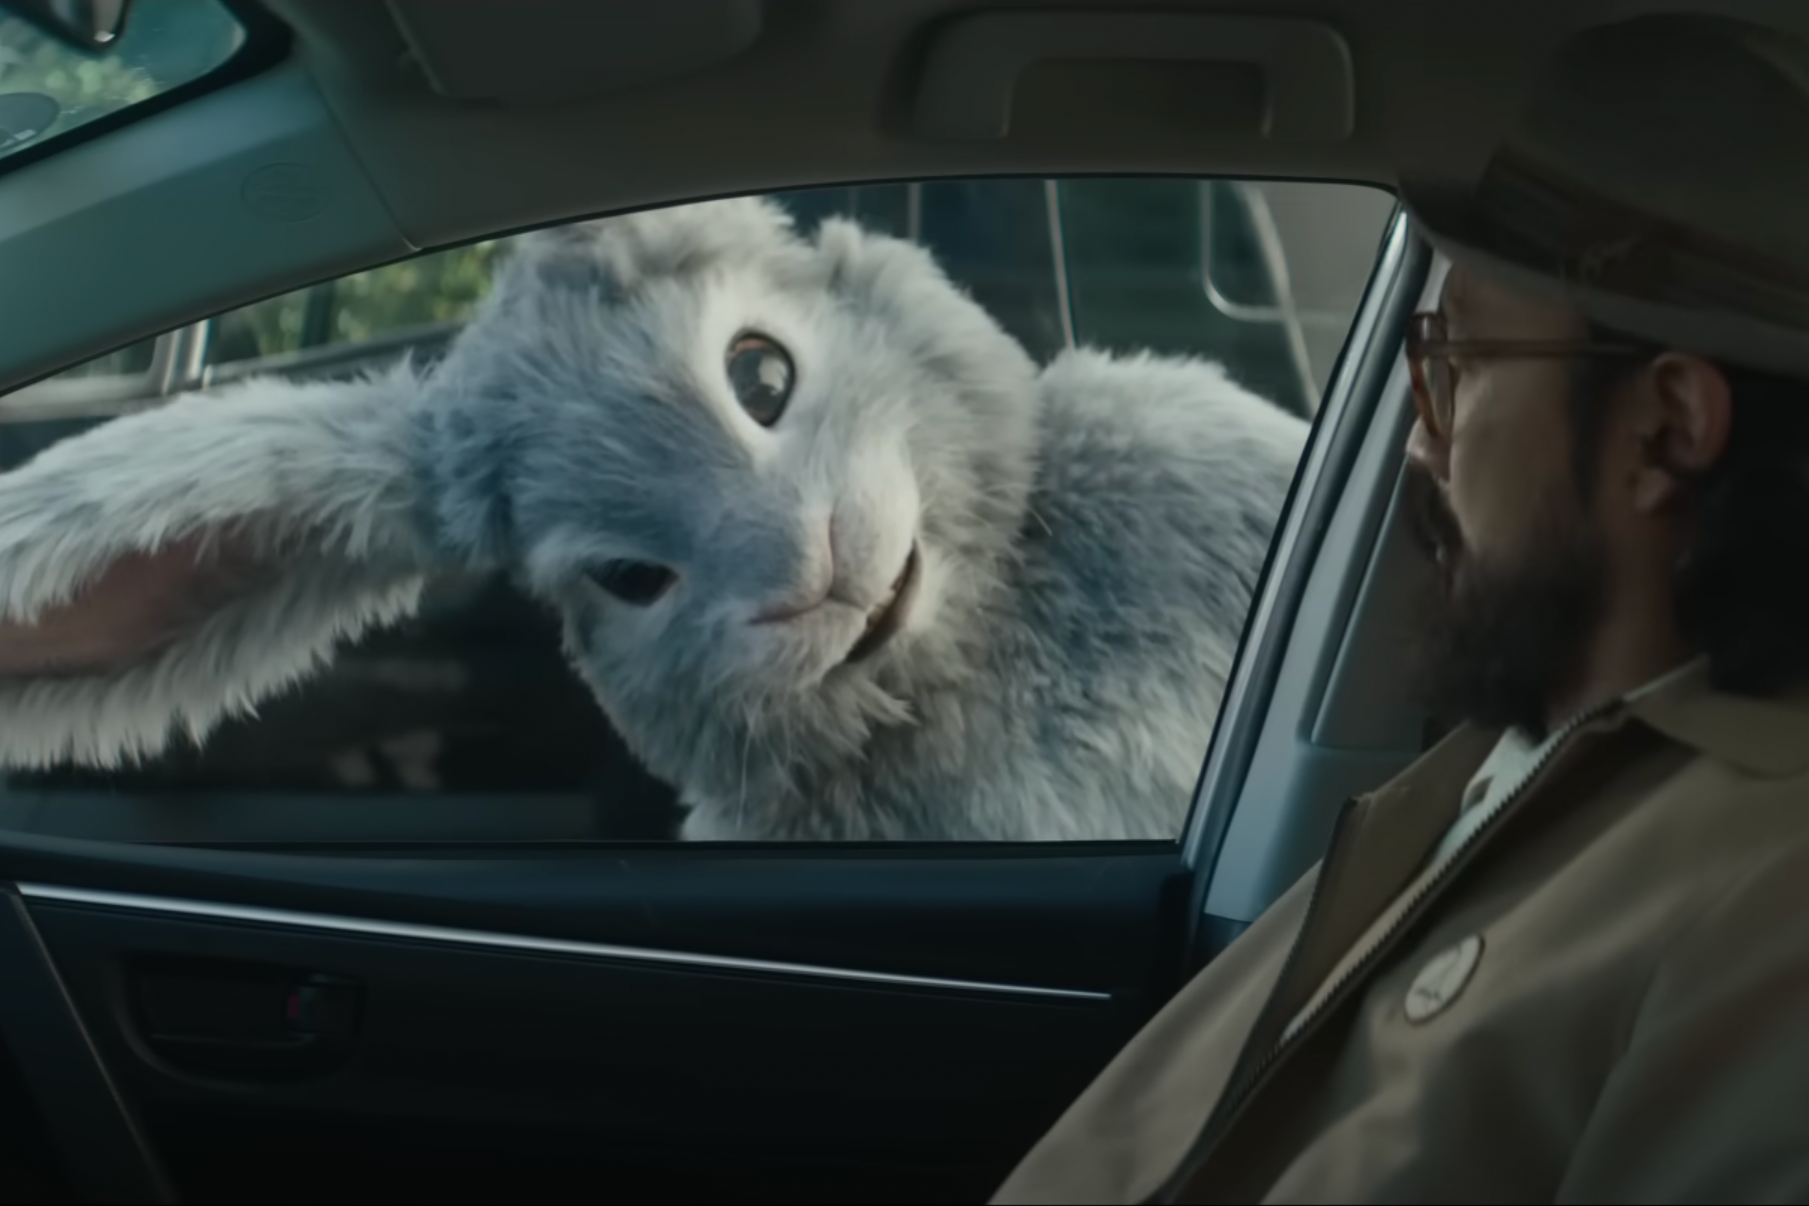 A human-sized rabbit peers into a car. The man inside appears confused.